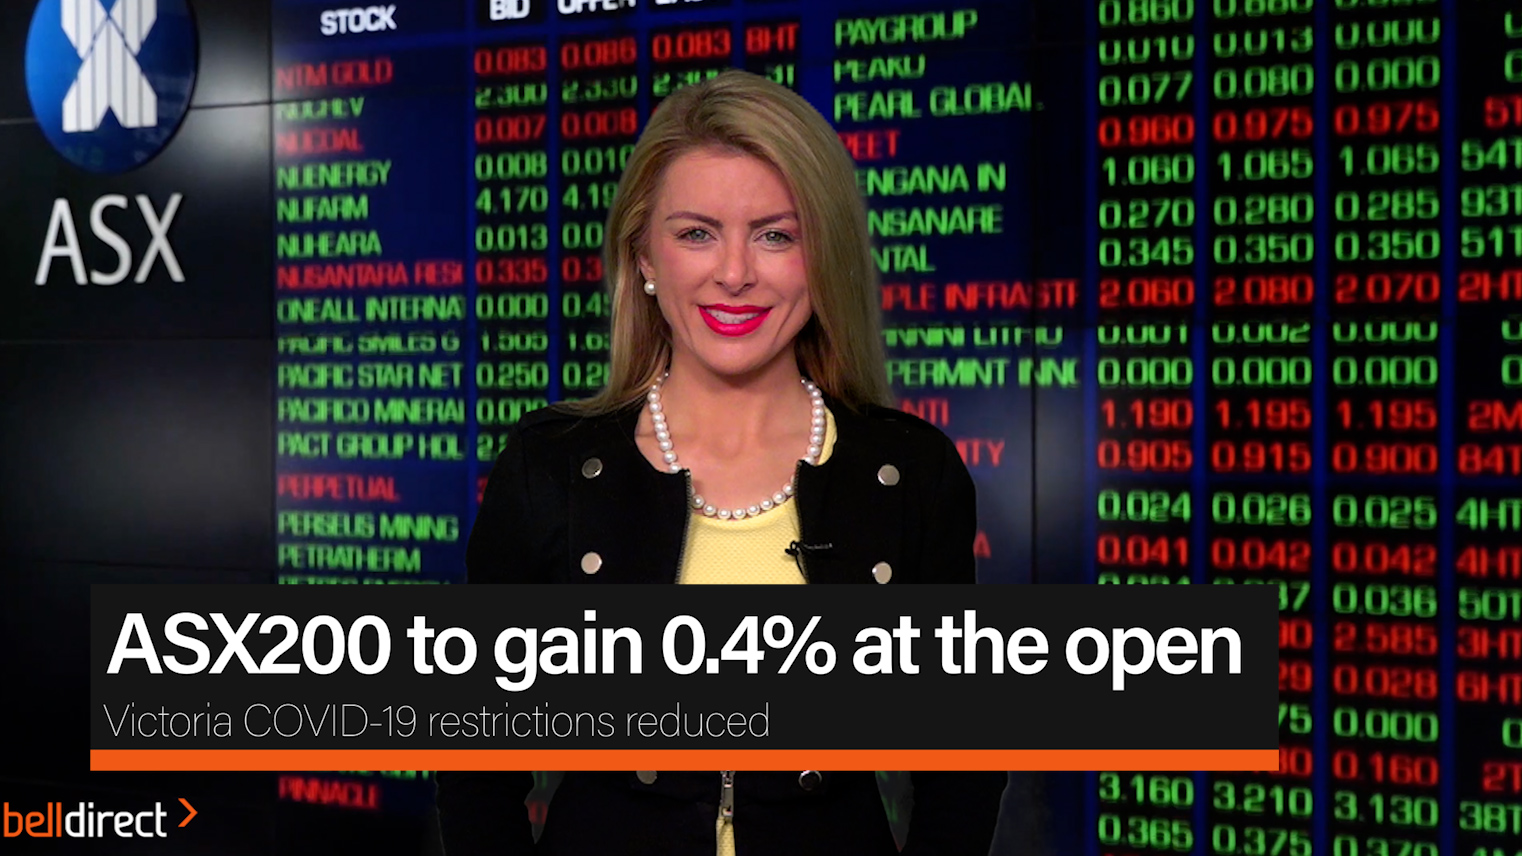 ASX200 to gain 0.4% at the open